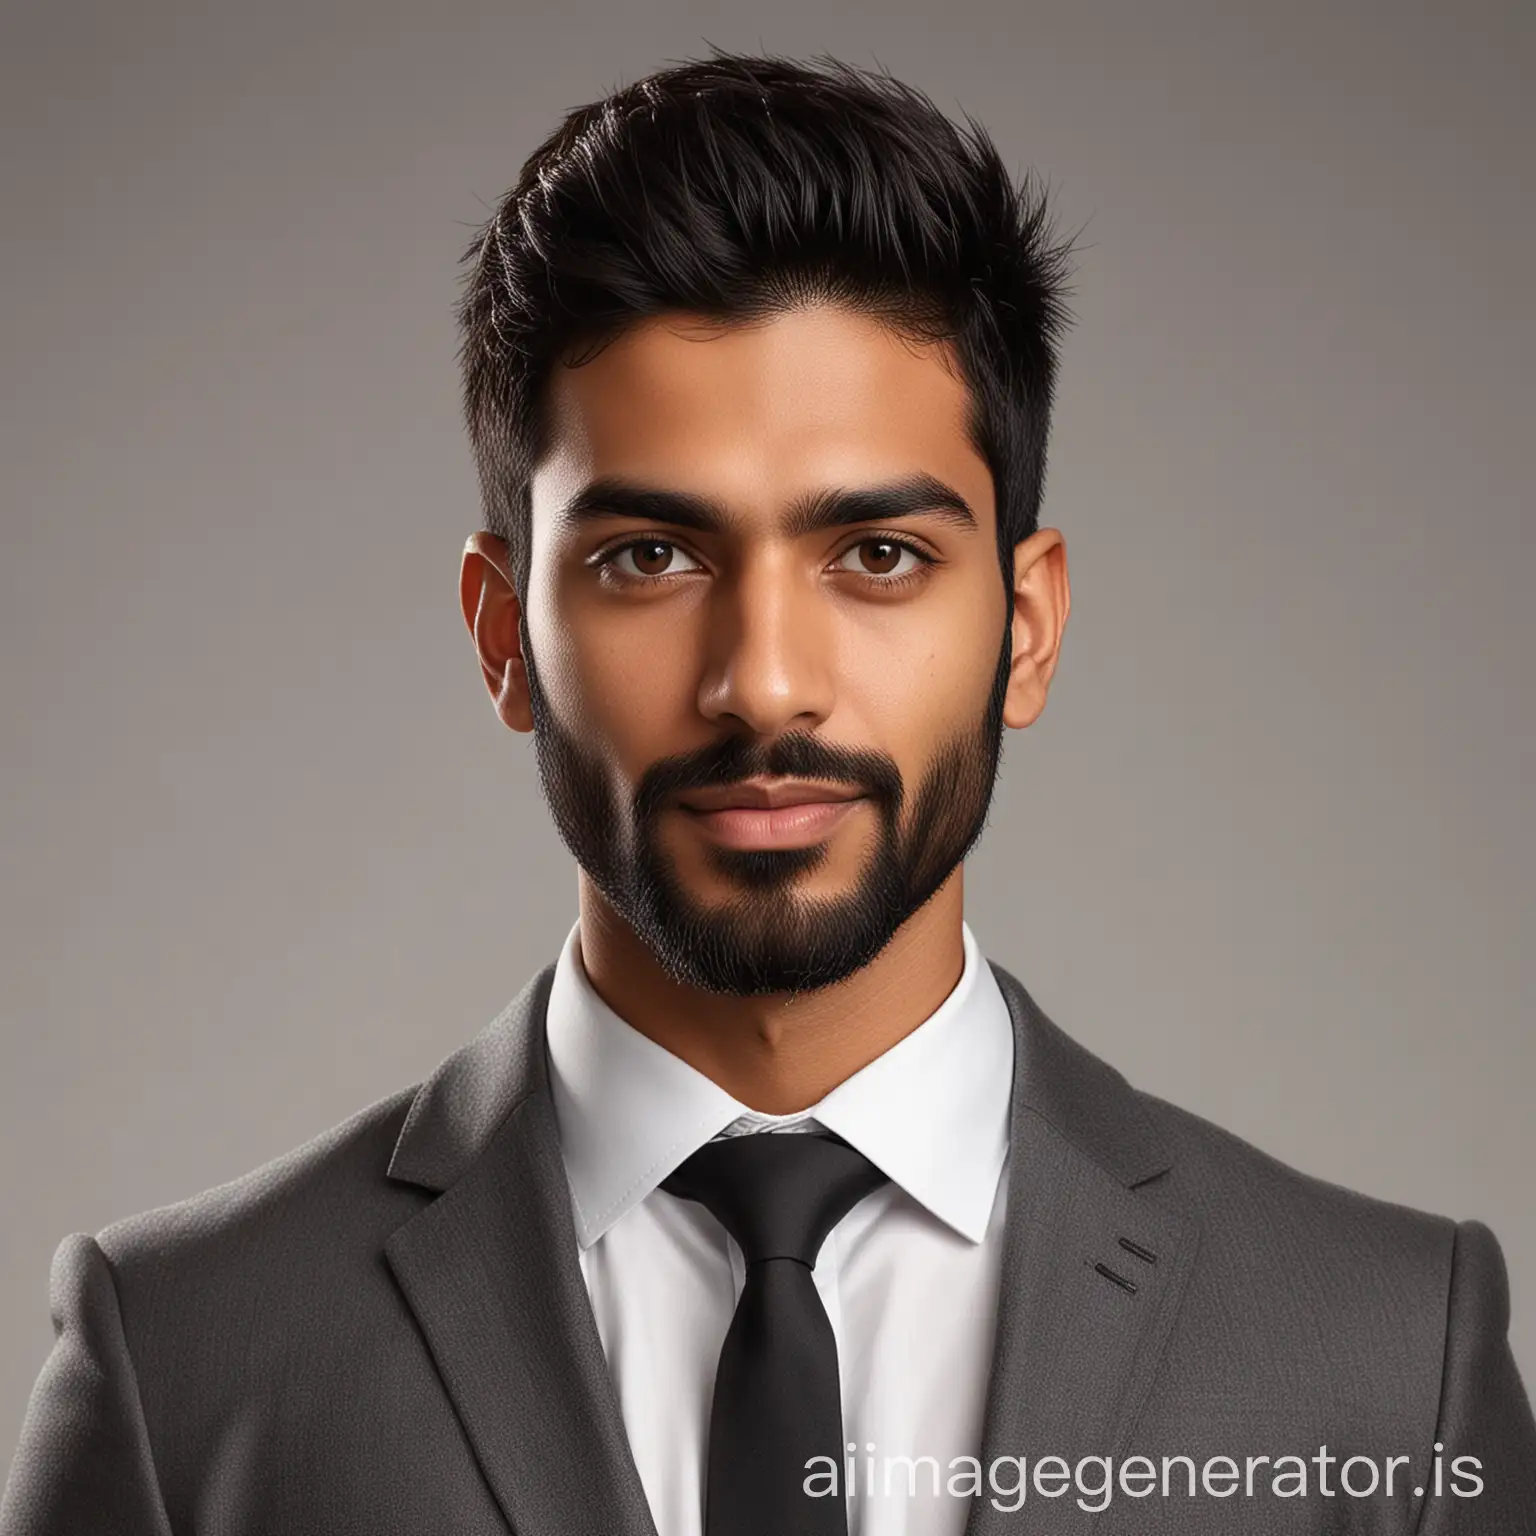 LinkedIn portrait / headshot of an Indian male with best suit without tie. looking at the camera. hyper realistic. plain background. medium hair. lite eyebrows, small eyes, good beard, black hair, medium ears. brownish skin tone.